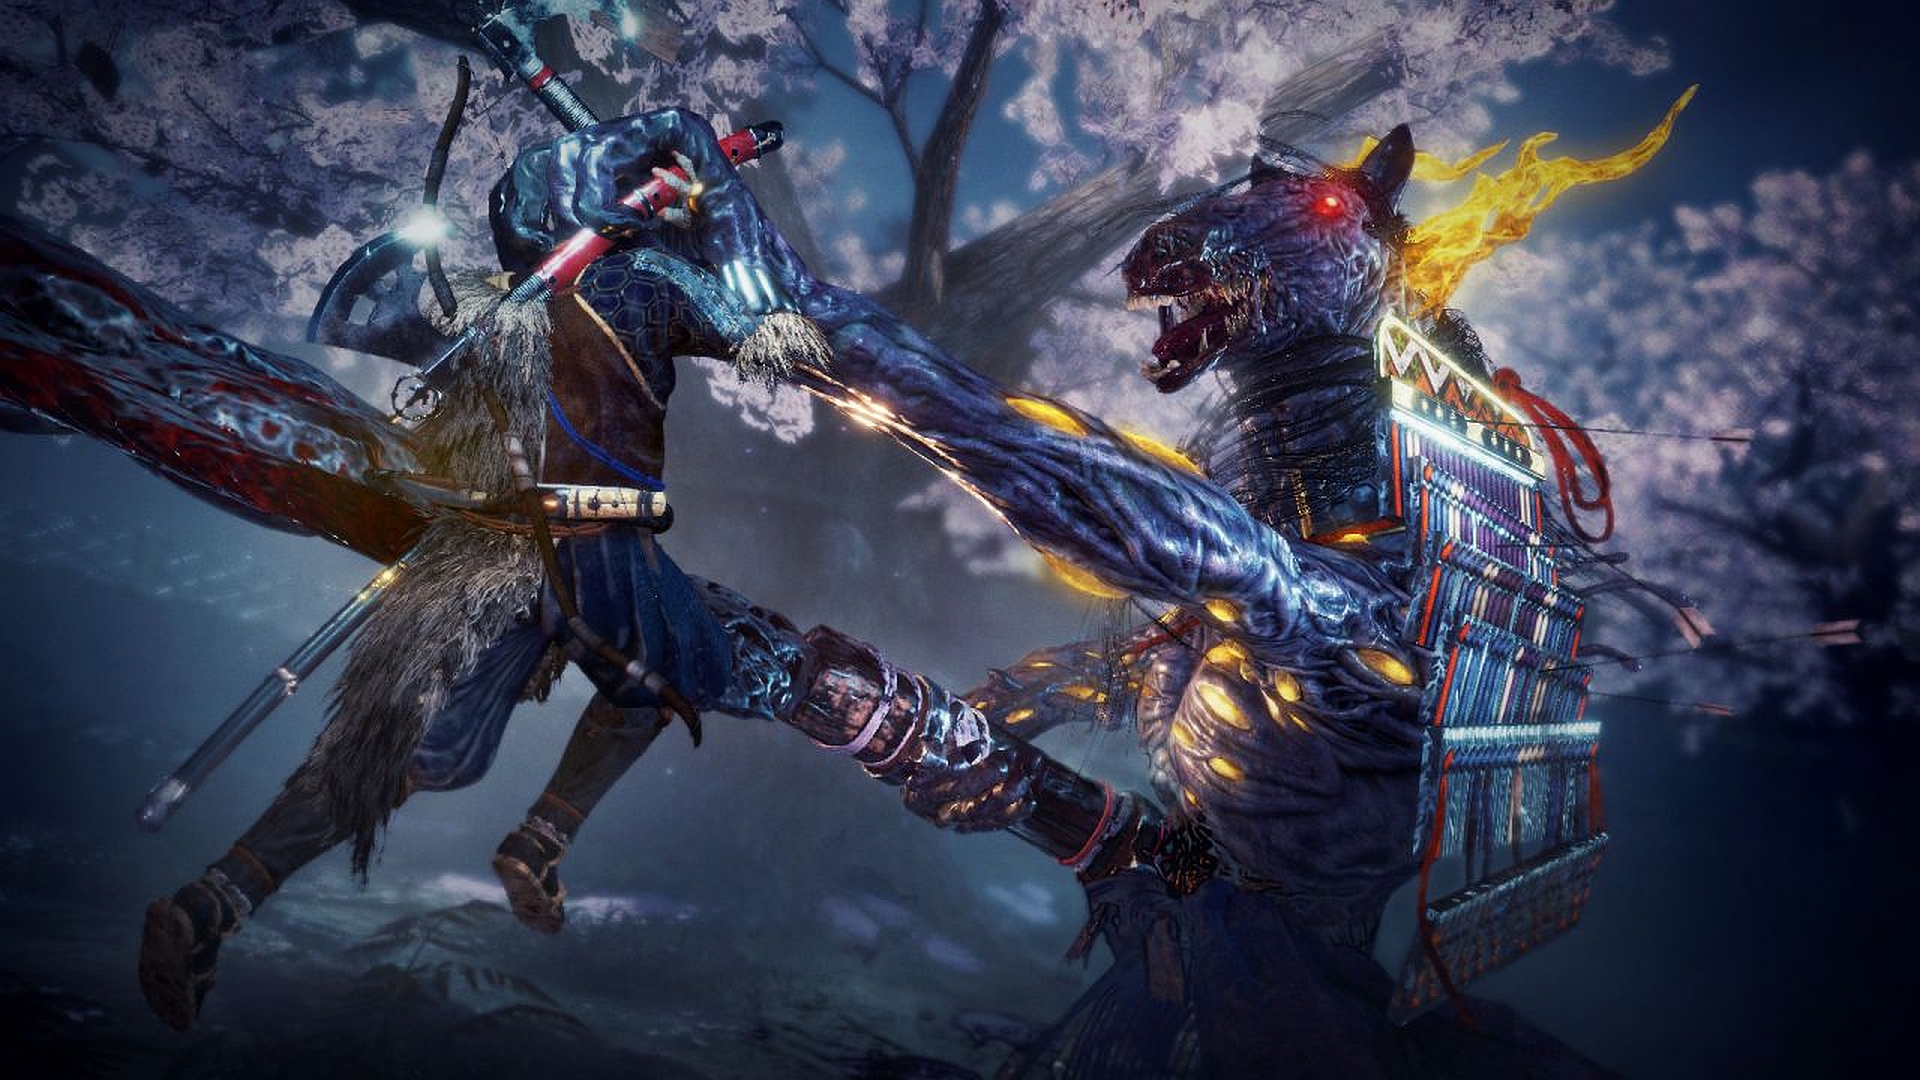 Nioh 4k Gameplay Footage Showcases Tgs Demo And New Boss Fight